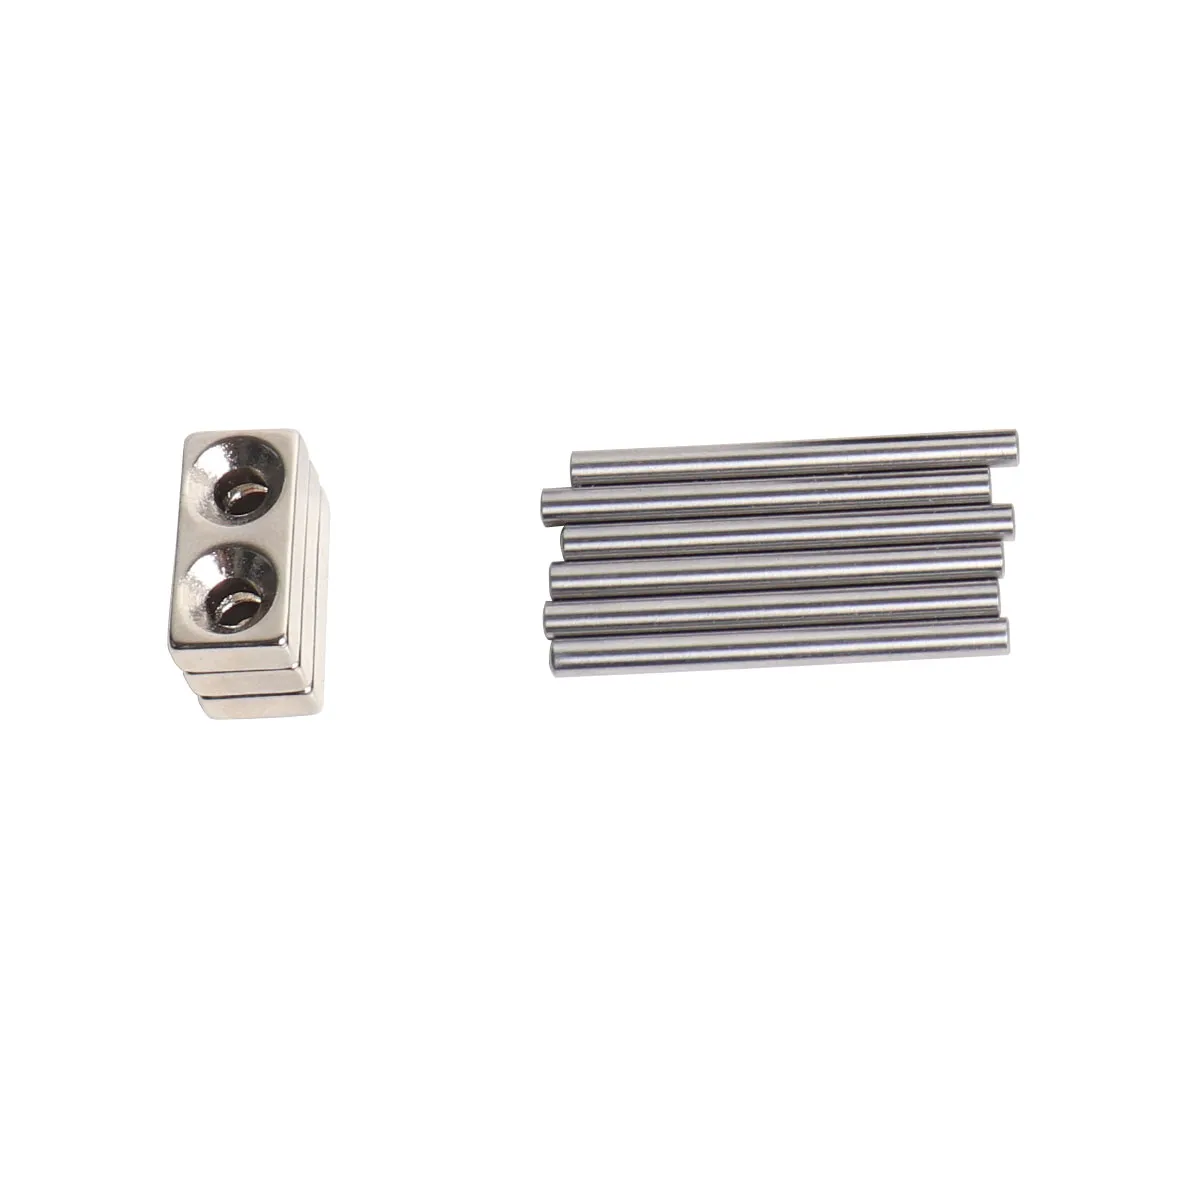 Printer Supplies V-Core 3.1 3D Printer Bed Arm Parts Dowel Pin 3x35mm Rectangle Magnet 20x10x5mm Two Hole M3 Countersink screw